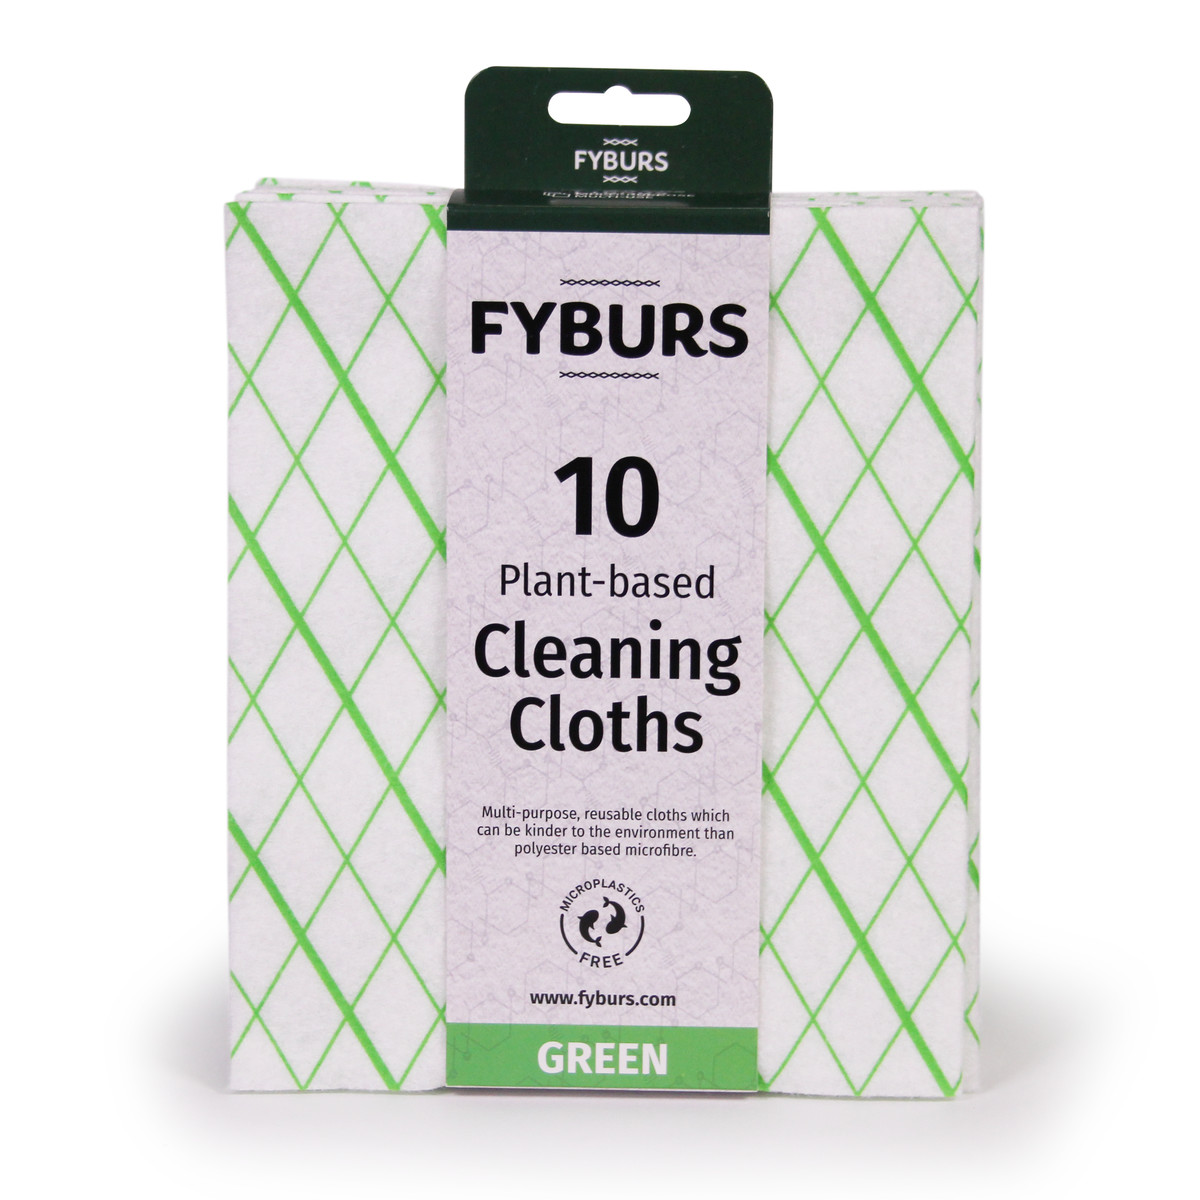 FYBURS Plant-based Cleaning Cloths – Green